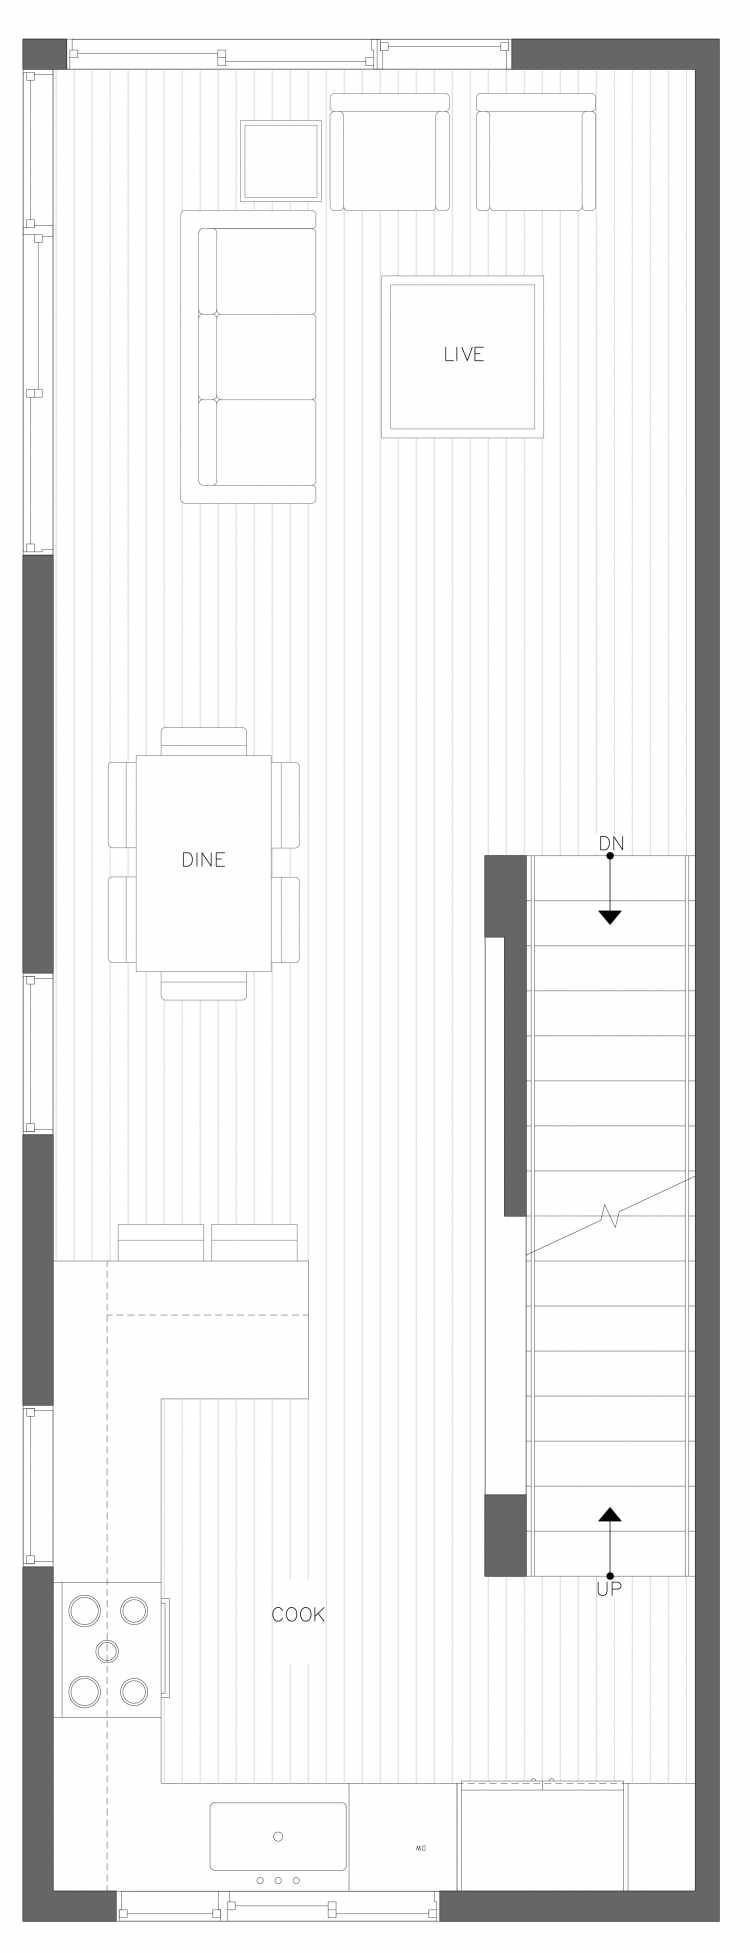 Second Floor Plan of 3410A 15th Ave W, One of the Arlo Townhomes in North Queen Anne